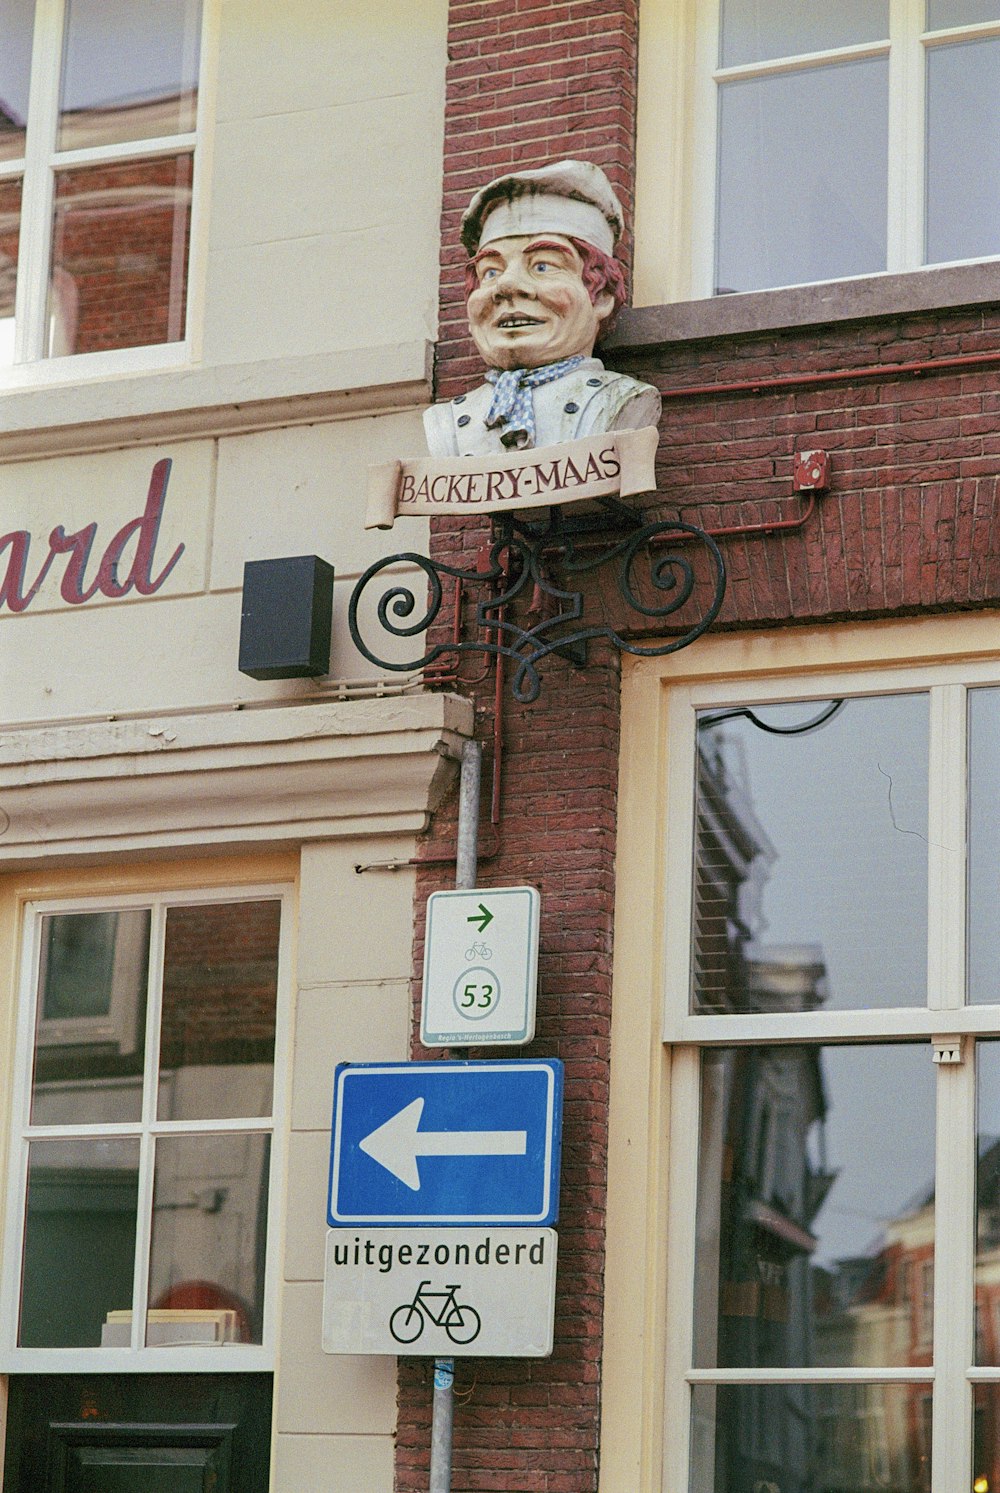 a street sign on a brick building with a statue of a man's head